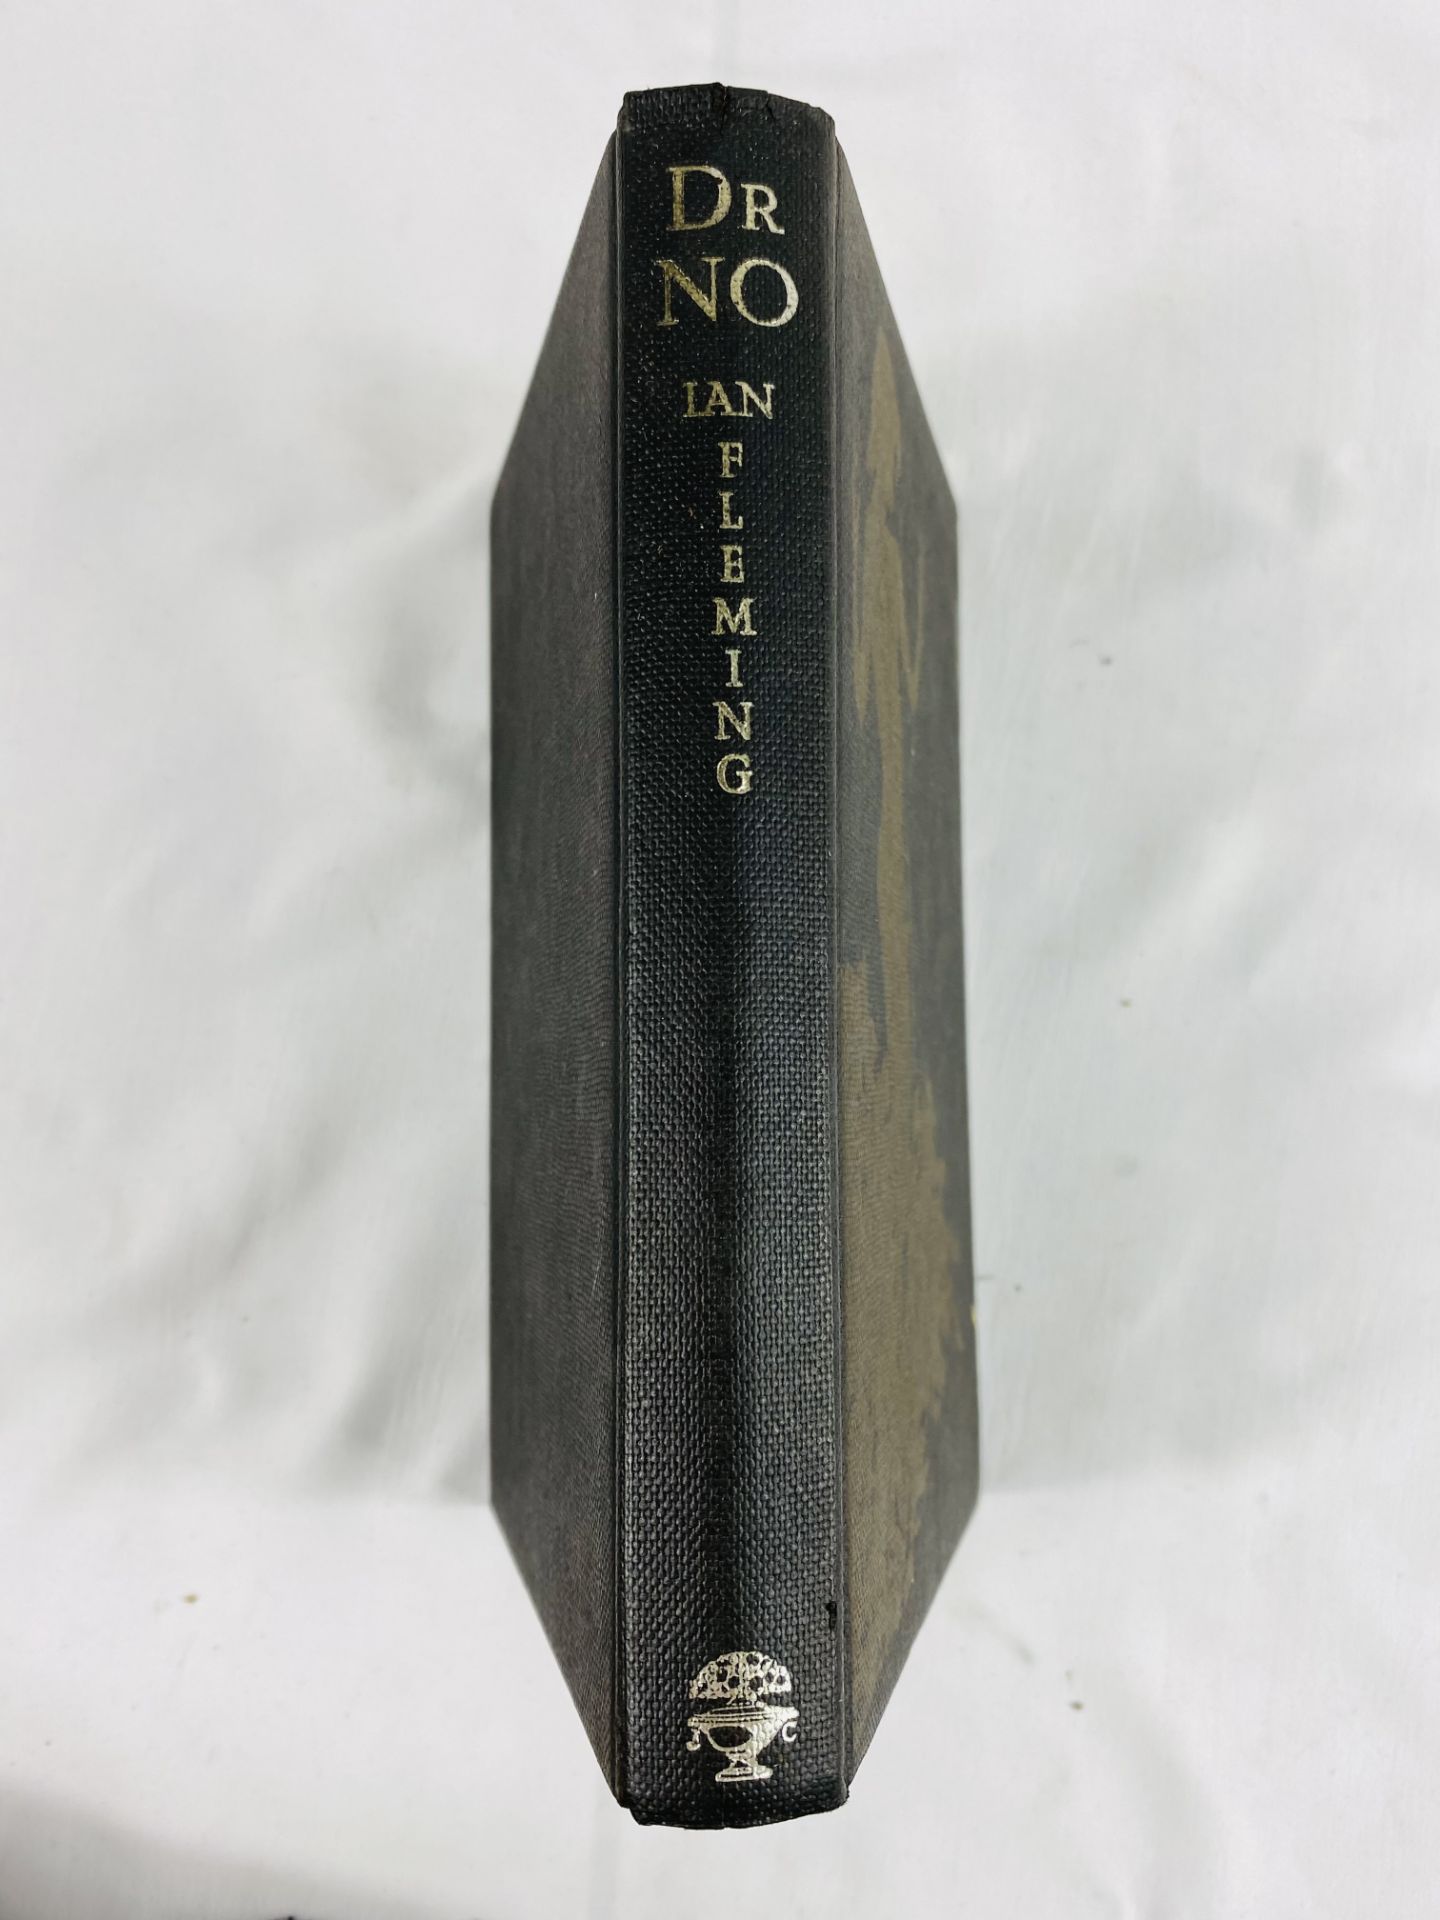 Ian Fleming Dr. No first edition second edition - Image 3 of 6